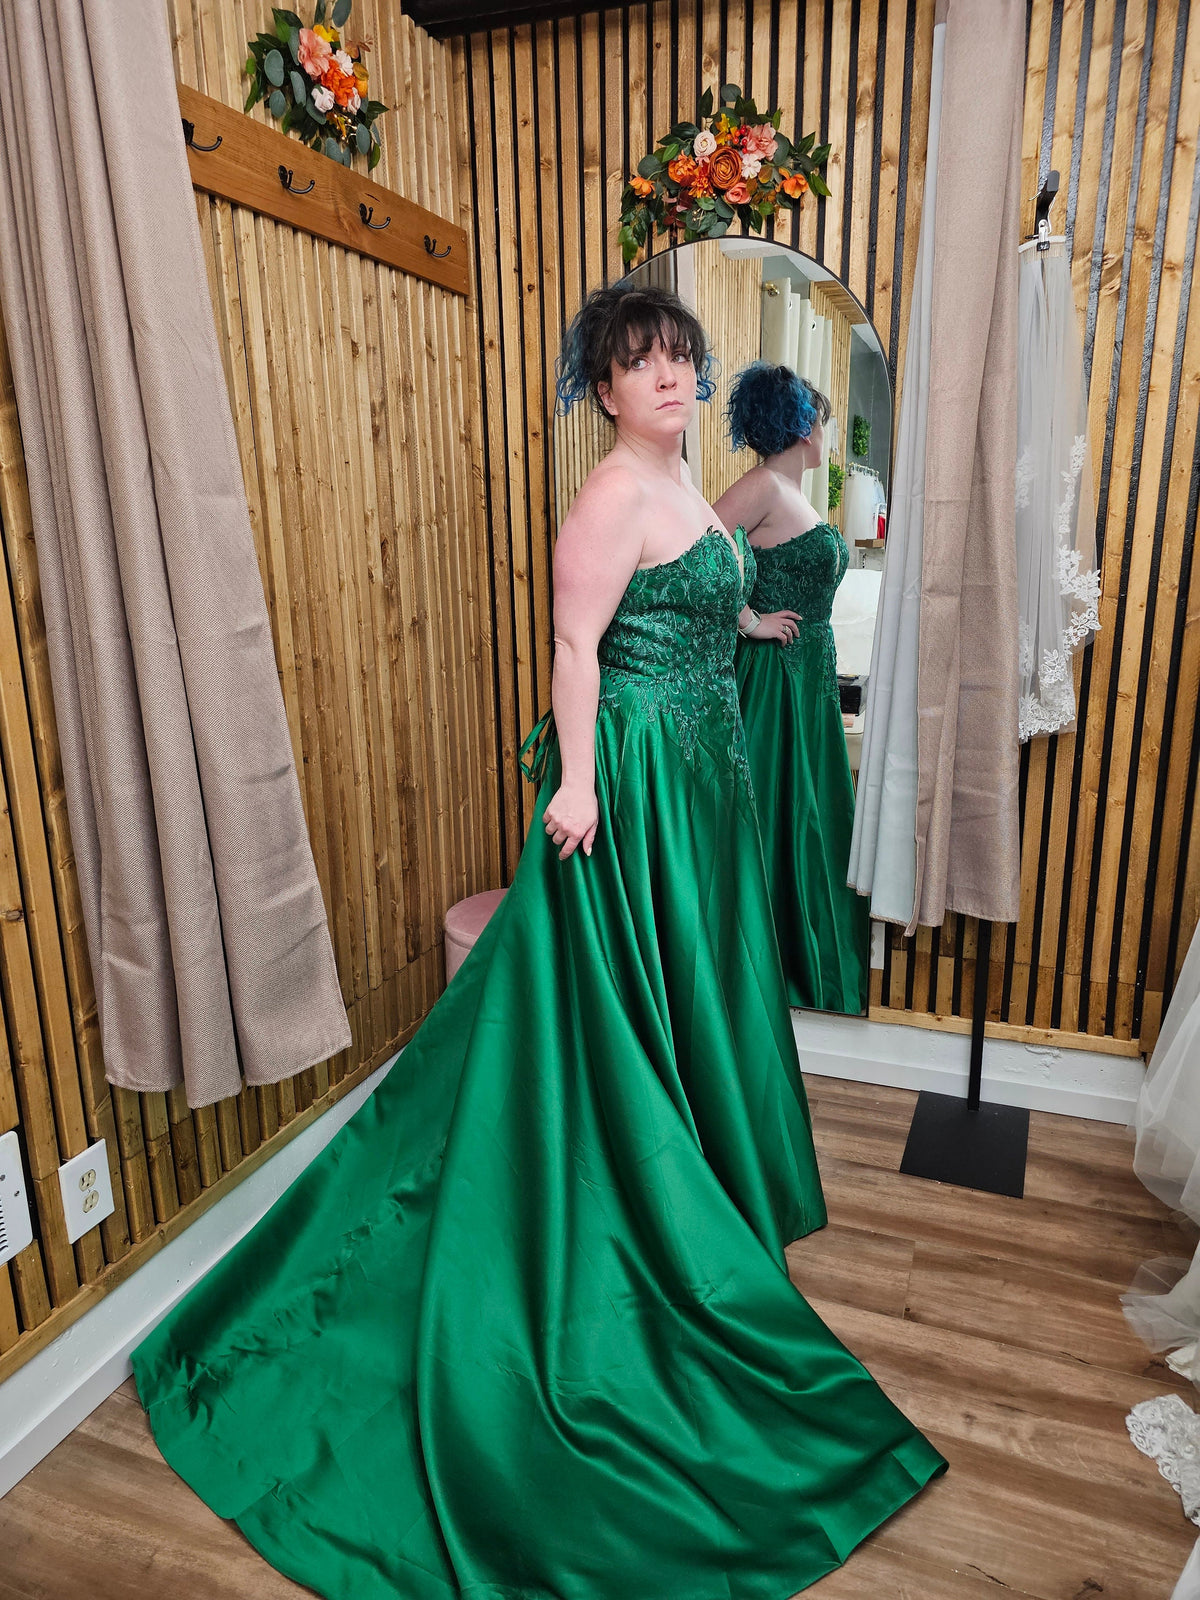 Untraditional Emerald Green Wedding Dress Bridal Gown Sleeveless Strapless Lace with Train Satin Open Back Corset Ties and Pockets